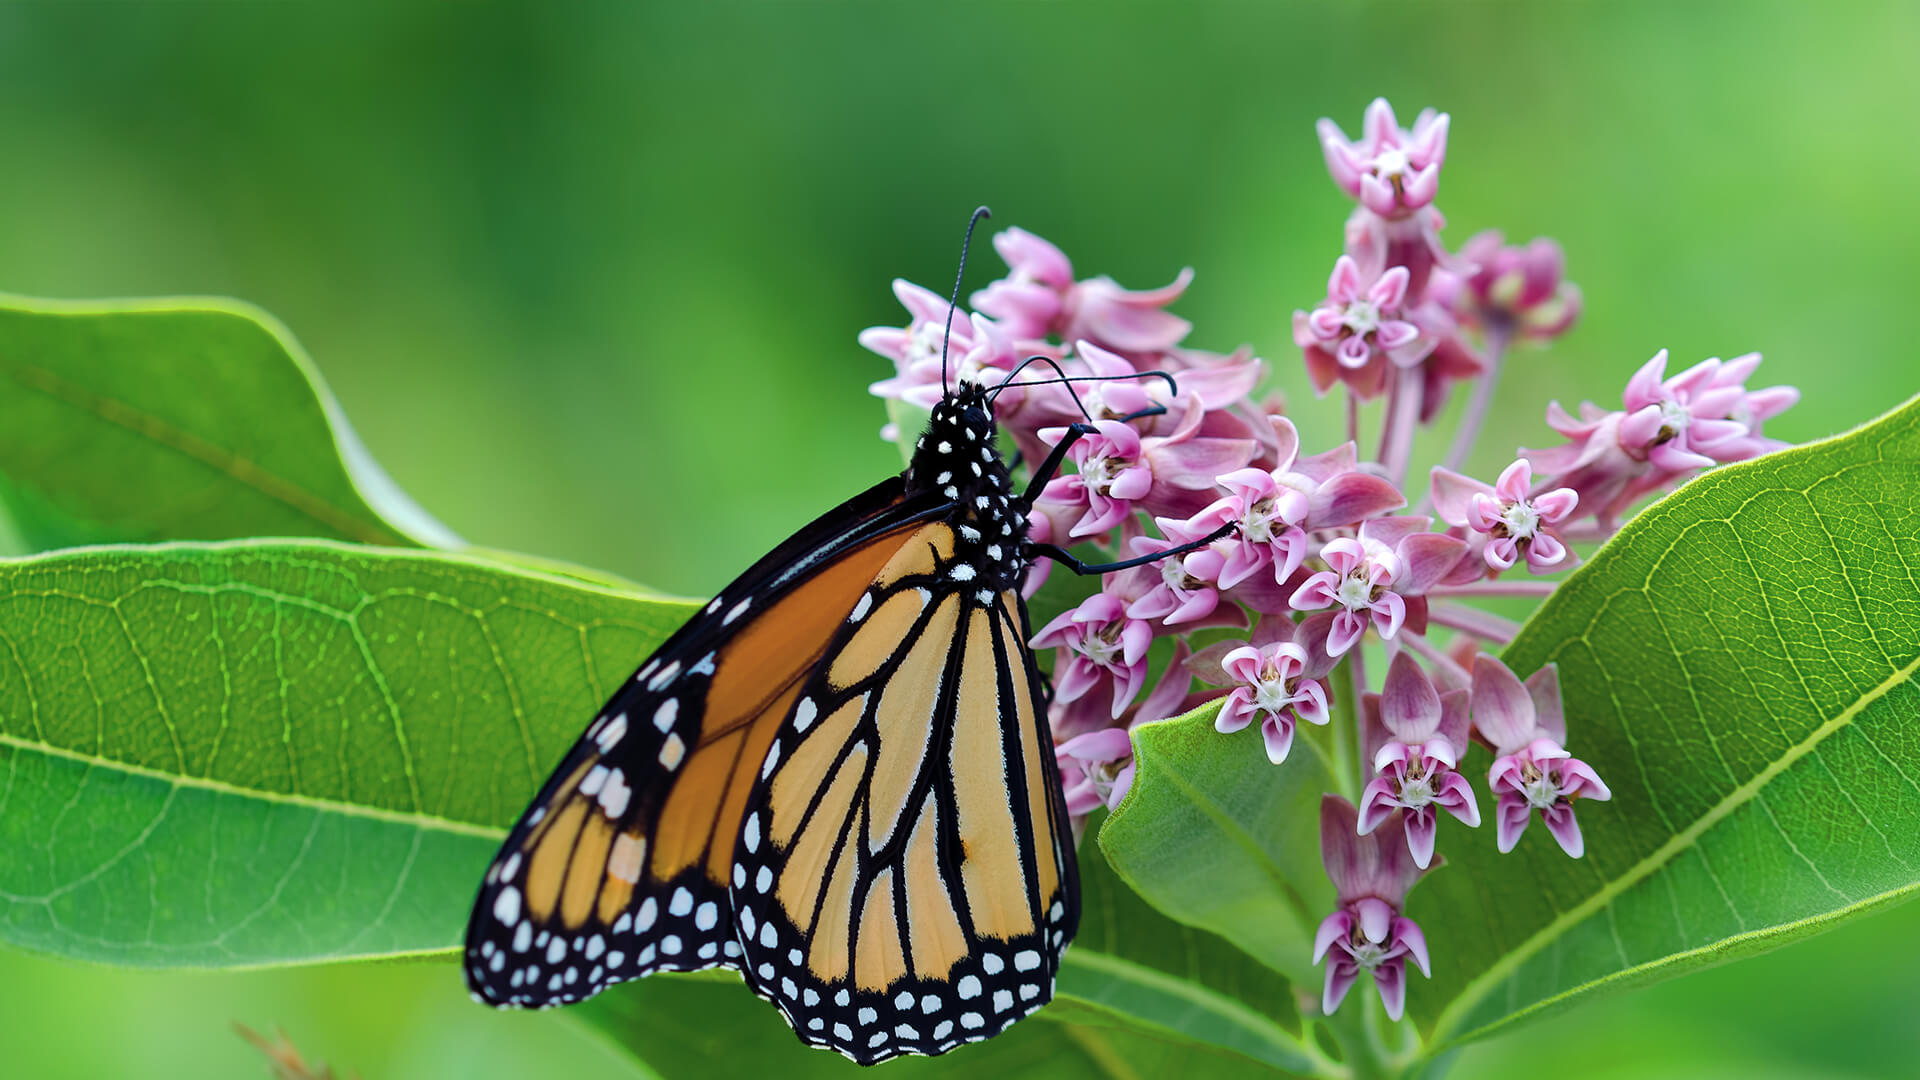 Monarch butterfly drinking nectar from milkweed flowers.